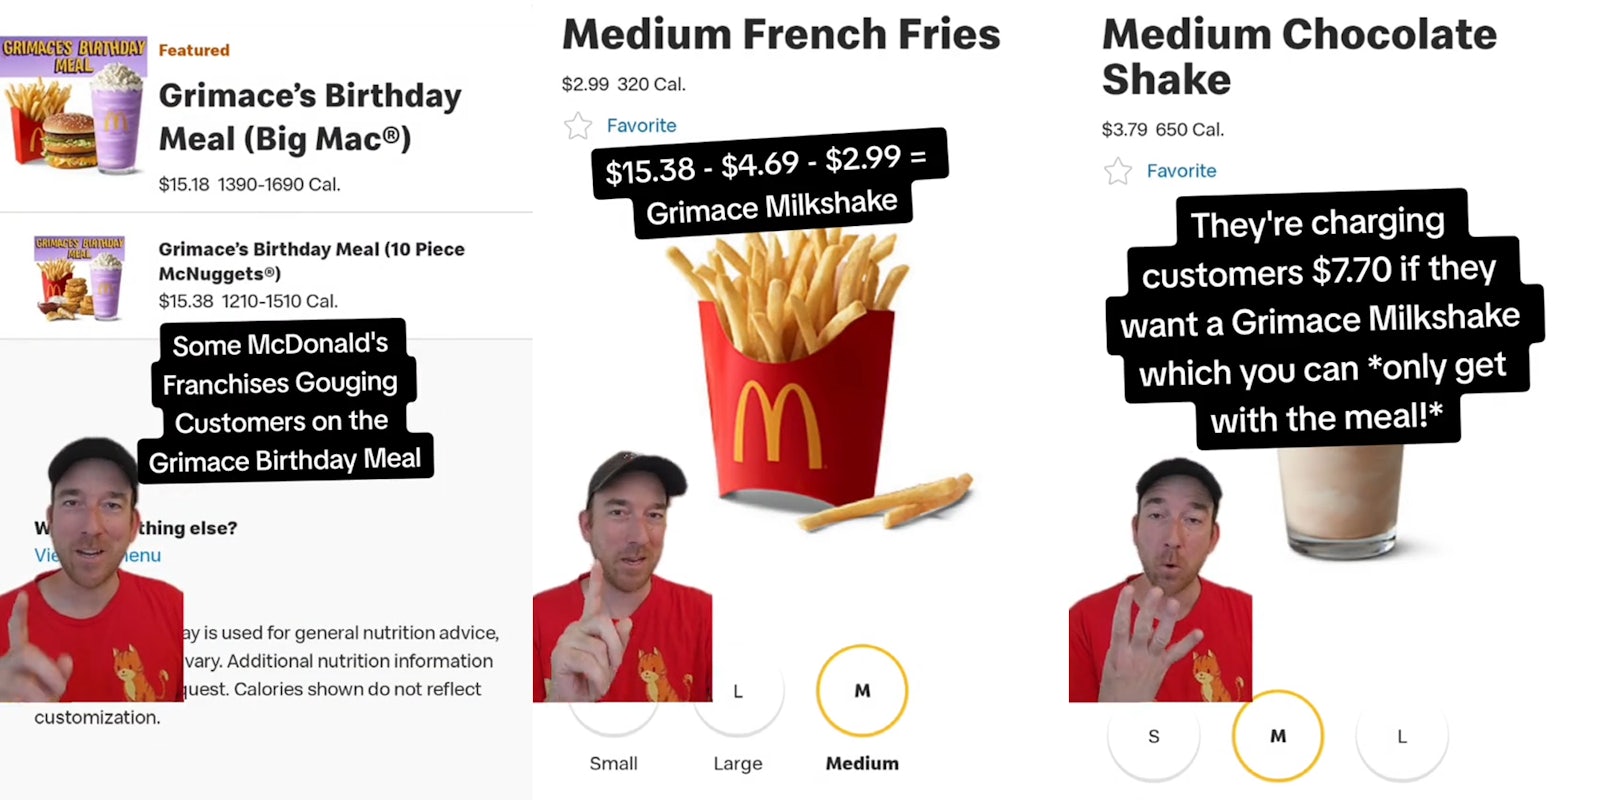 McDonald's customer greenscreen TikTok over McDonald's menu with caption 'Some McDonald's Franchises Gouging customers on the Grimace Birthday Meal' (l) McDonald's customer greenscreen TikTok over McDonald's menu with caption '$15.38-$4.69-$2.99= Grimace Milkshake' (c) McDonald's customer greenscreen TikTok over McDonald's menu with caption 'They're charging customers $7.70 if they want a Grimace Milkshake which you can *only get with the meal!*' (r)